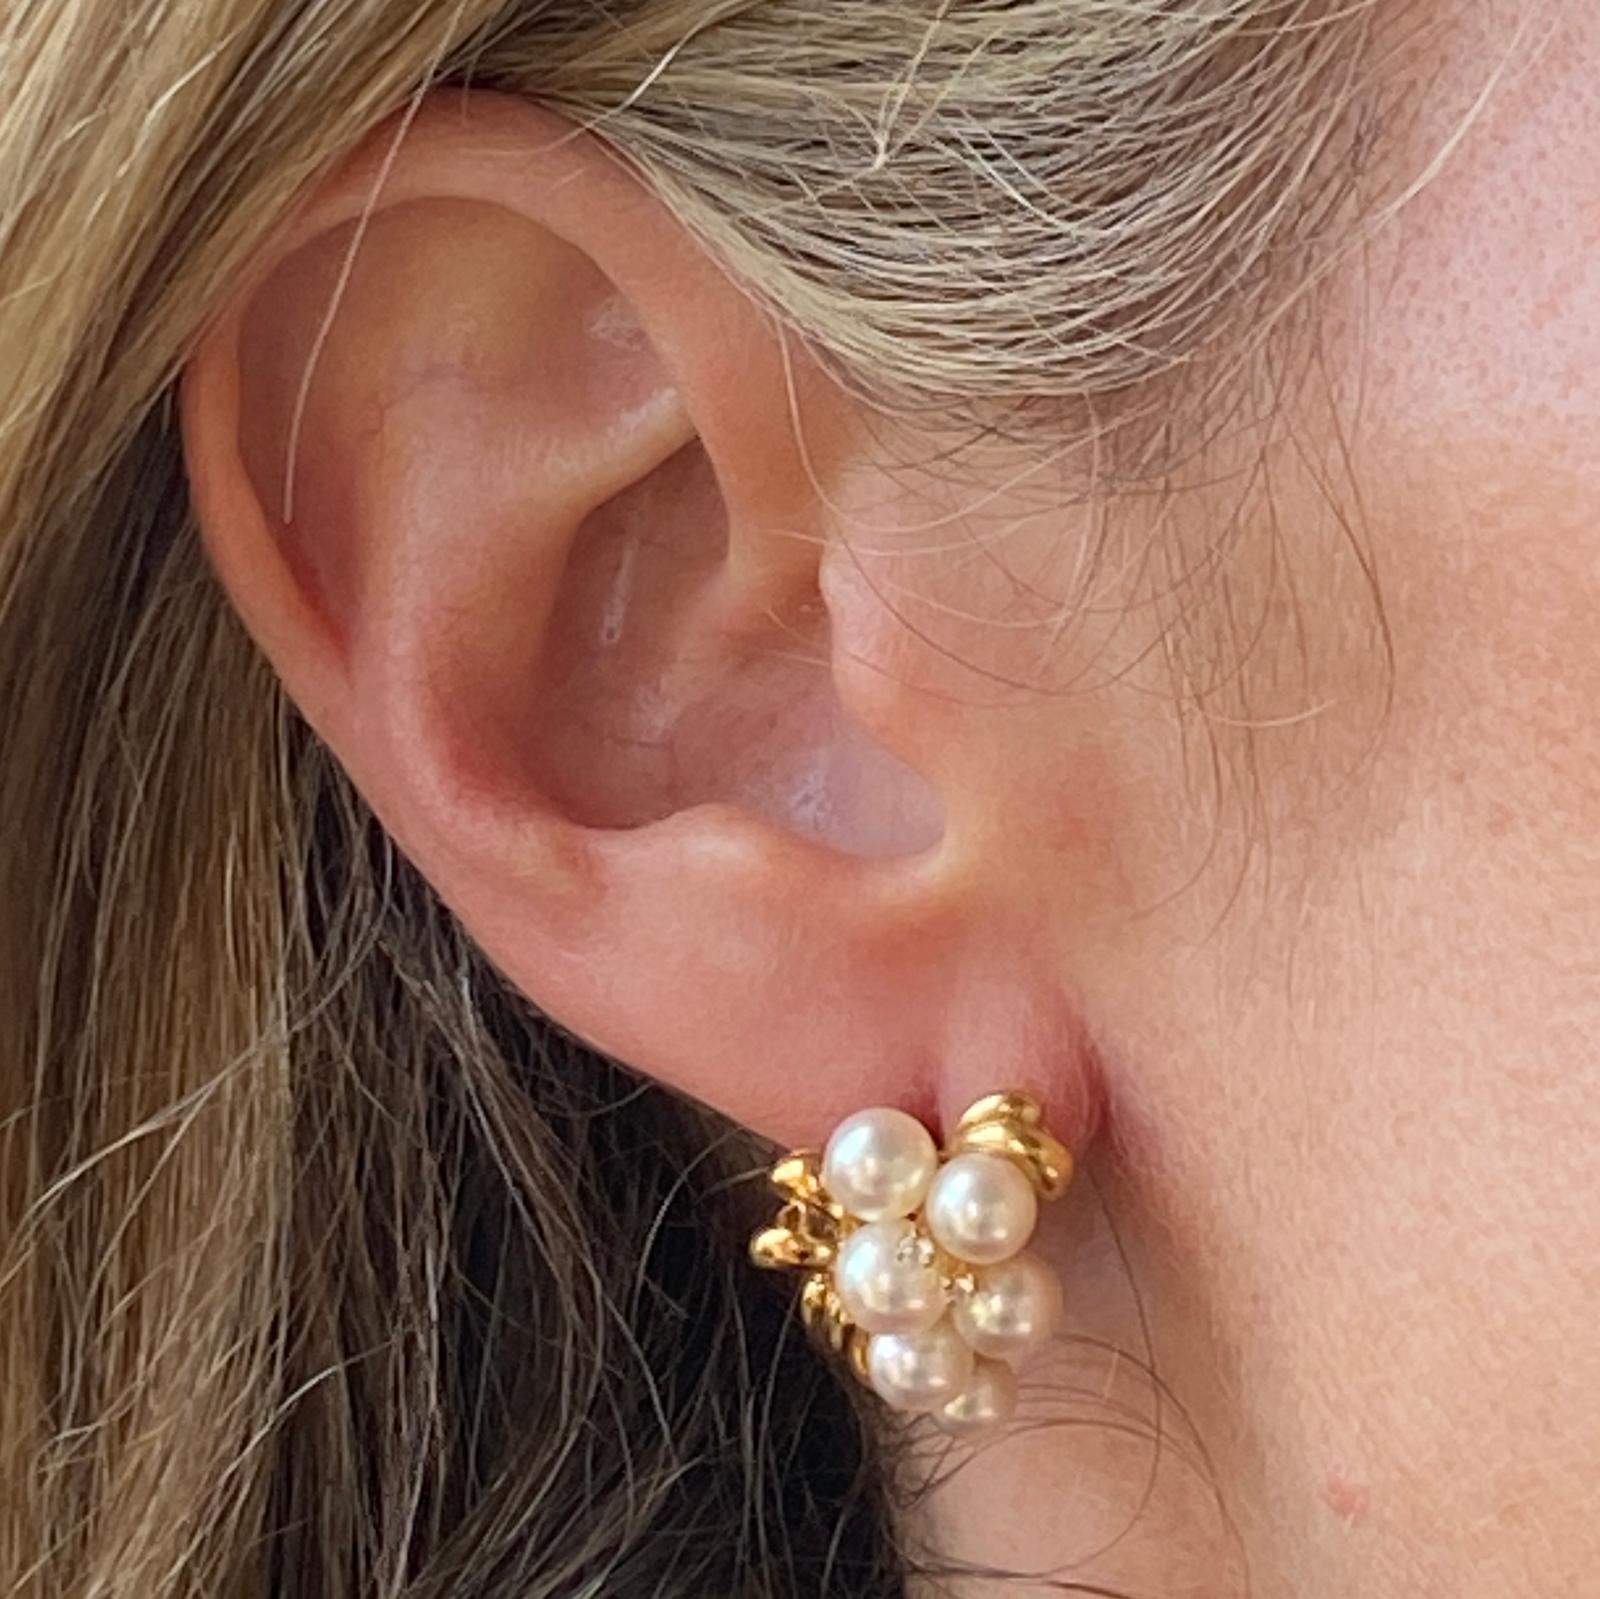 Pearl and diamond earrings by Mikimoto. The earrings are crafted in 18 karat yellow gold and feature white pearls measuring 4.5-5.5mm. Six round brilliant diamond accents weigh approximately .10 carat total weight. 
The earrings measure 15 x 20mm. 